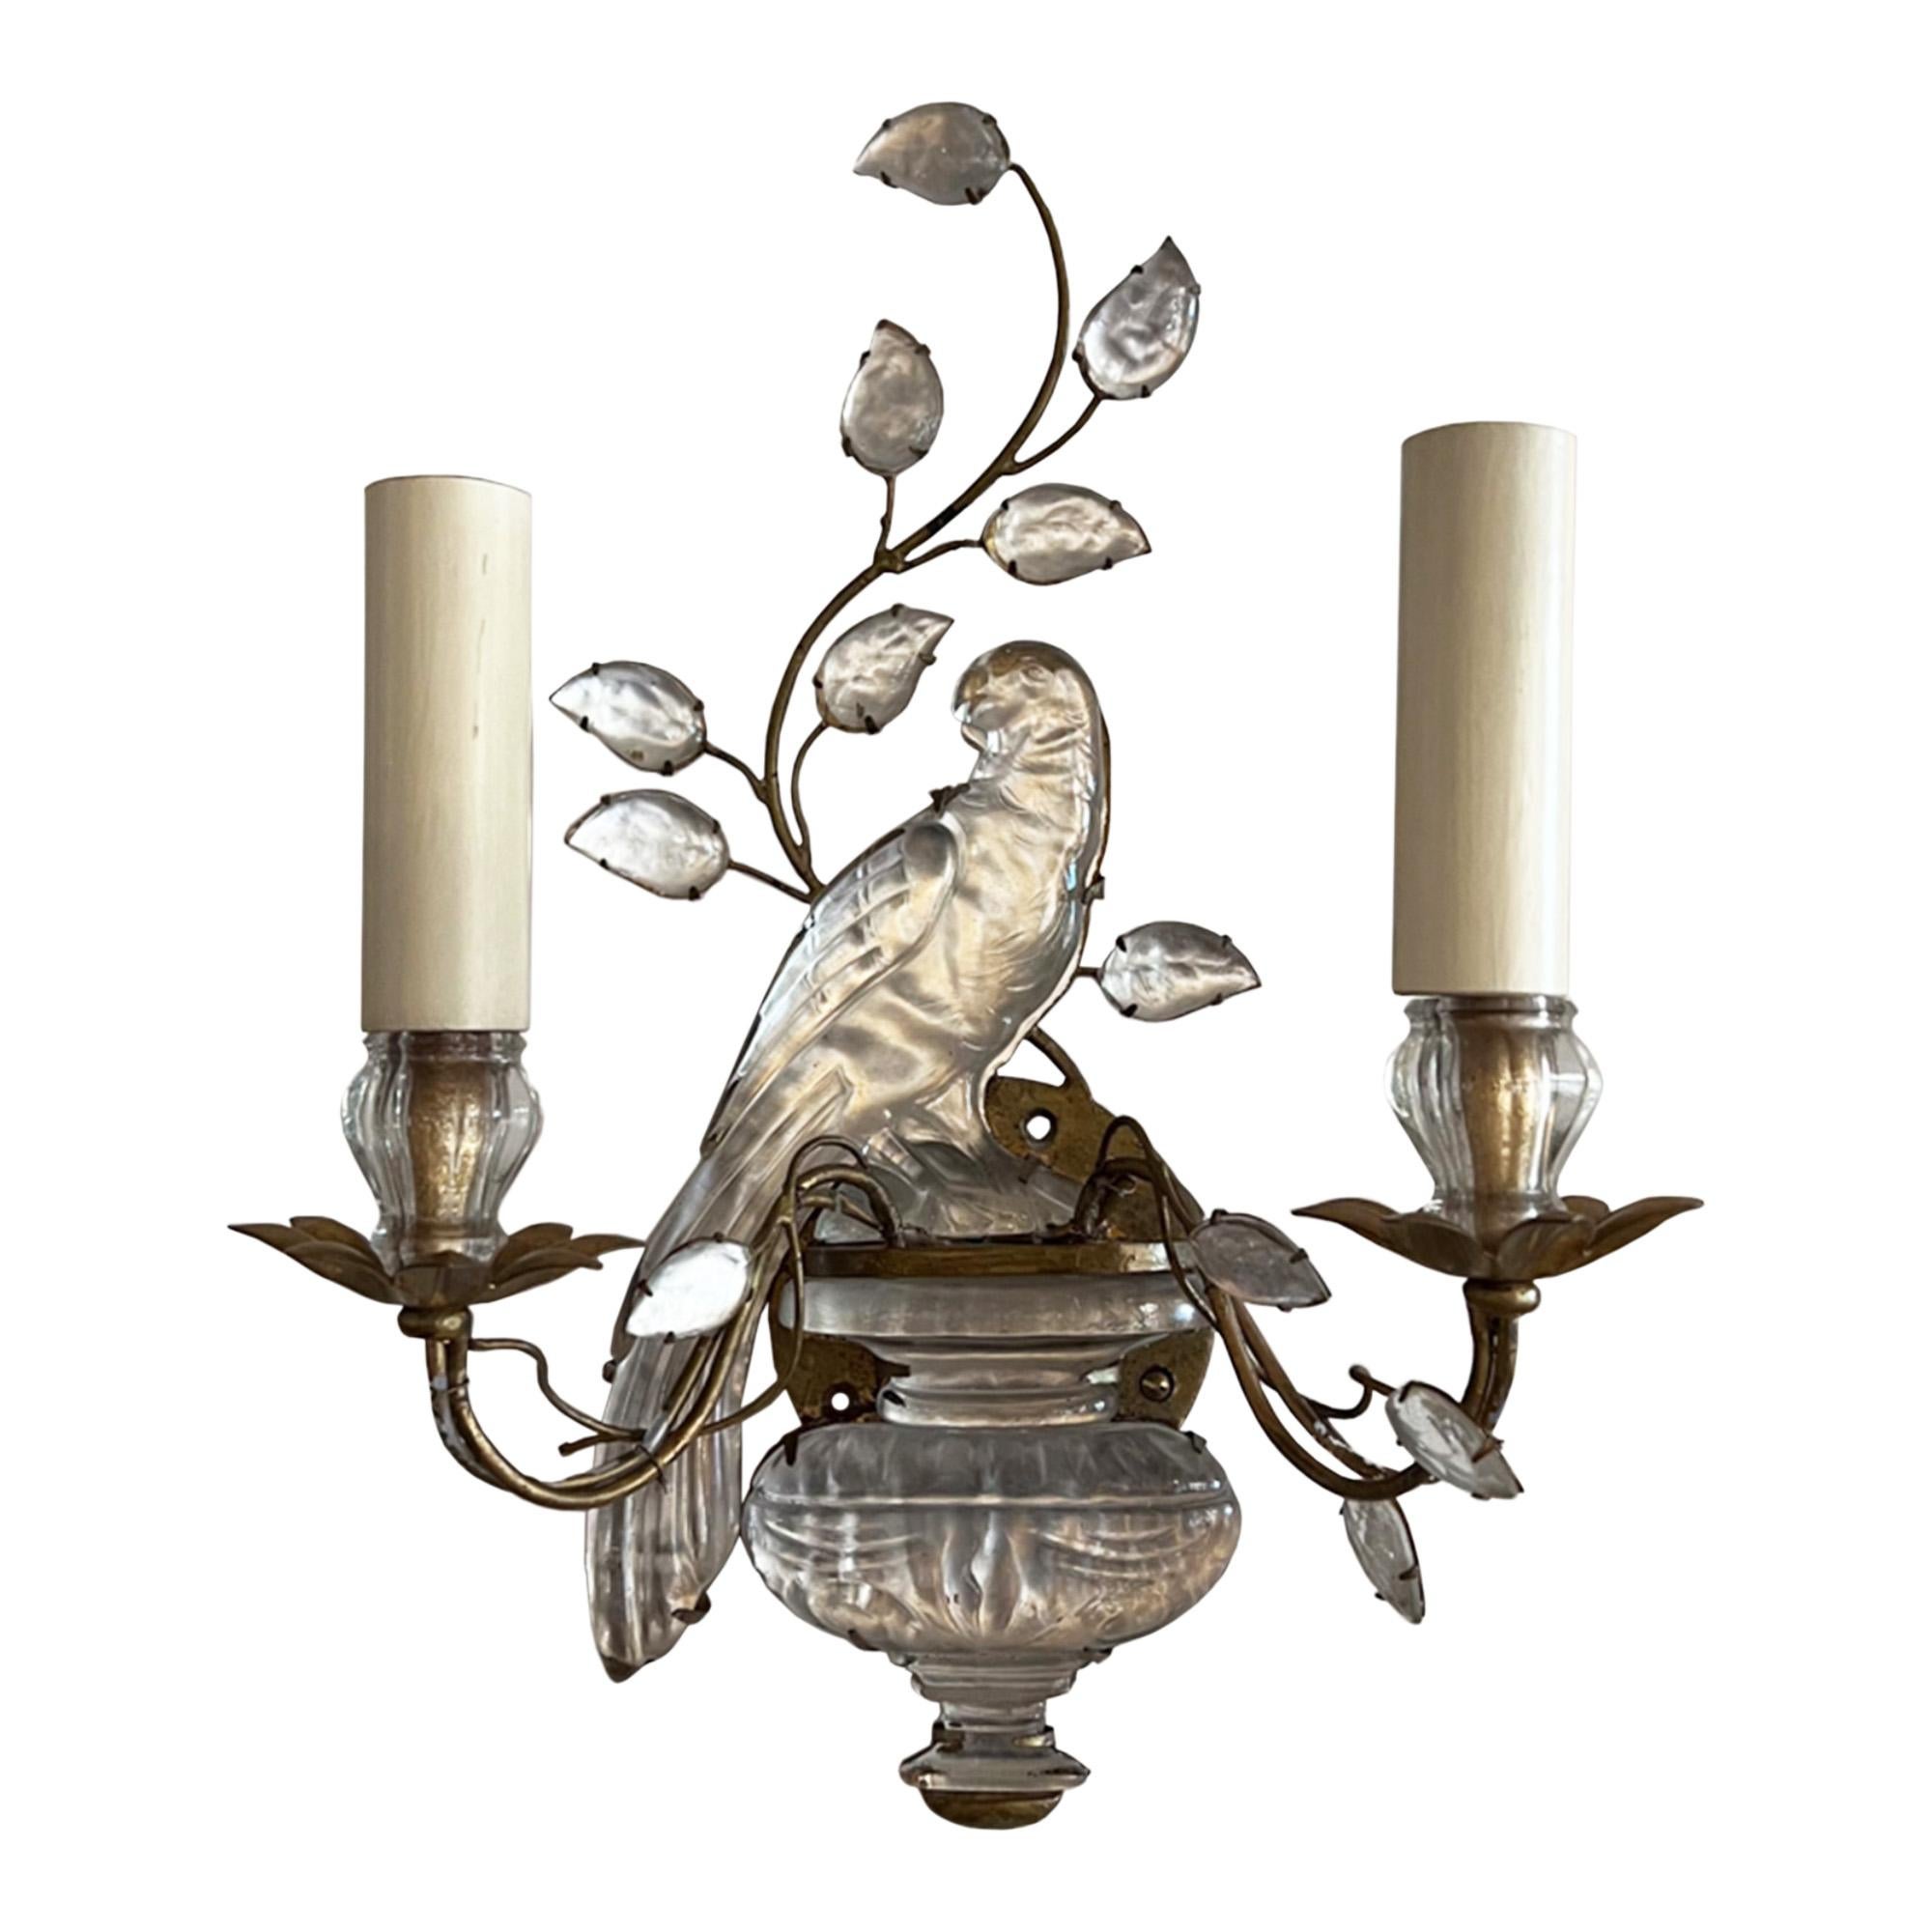 This is a near pair of Maison Baguès wall sconces with their iconic parrot and urn design. 

The parrots are traditionally paired as they are here - one facing left, while the other faces right.

However, we would like to point out the slight